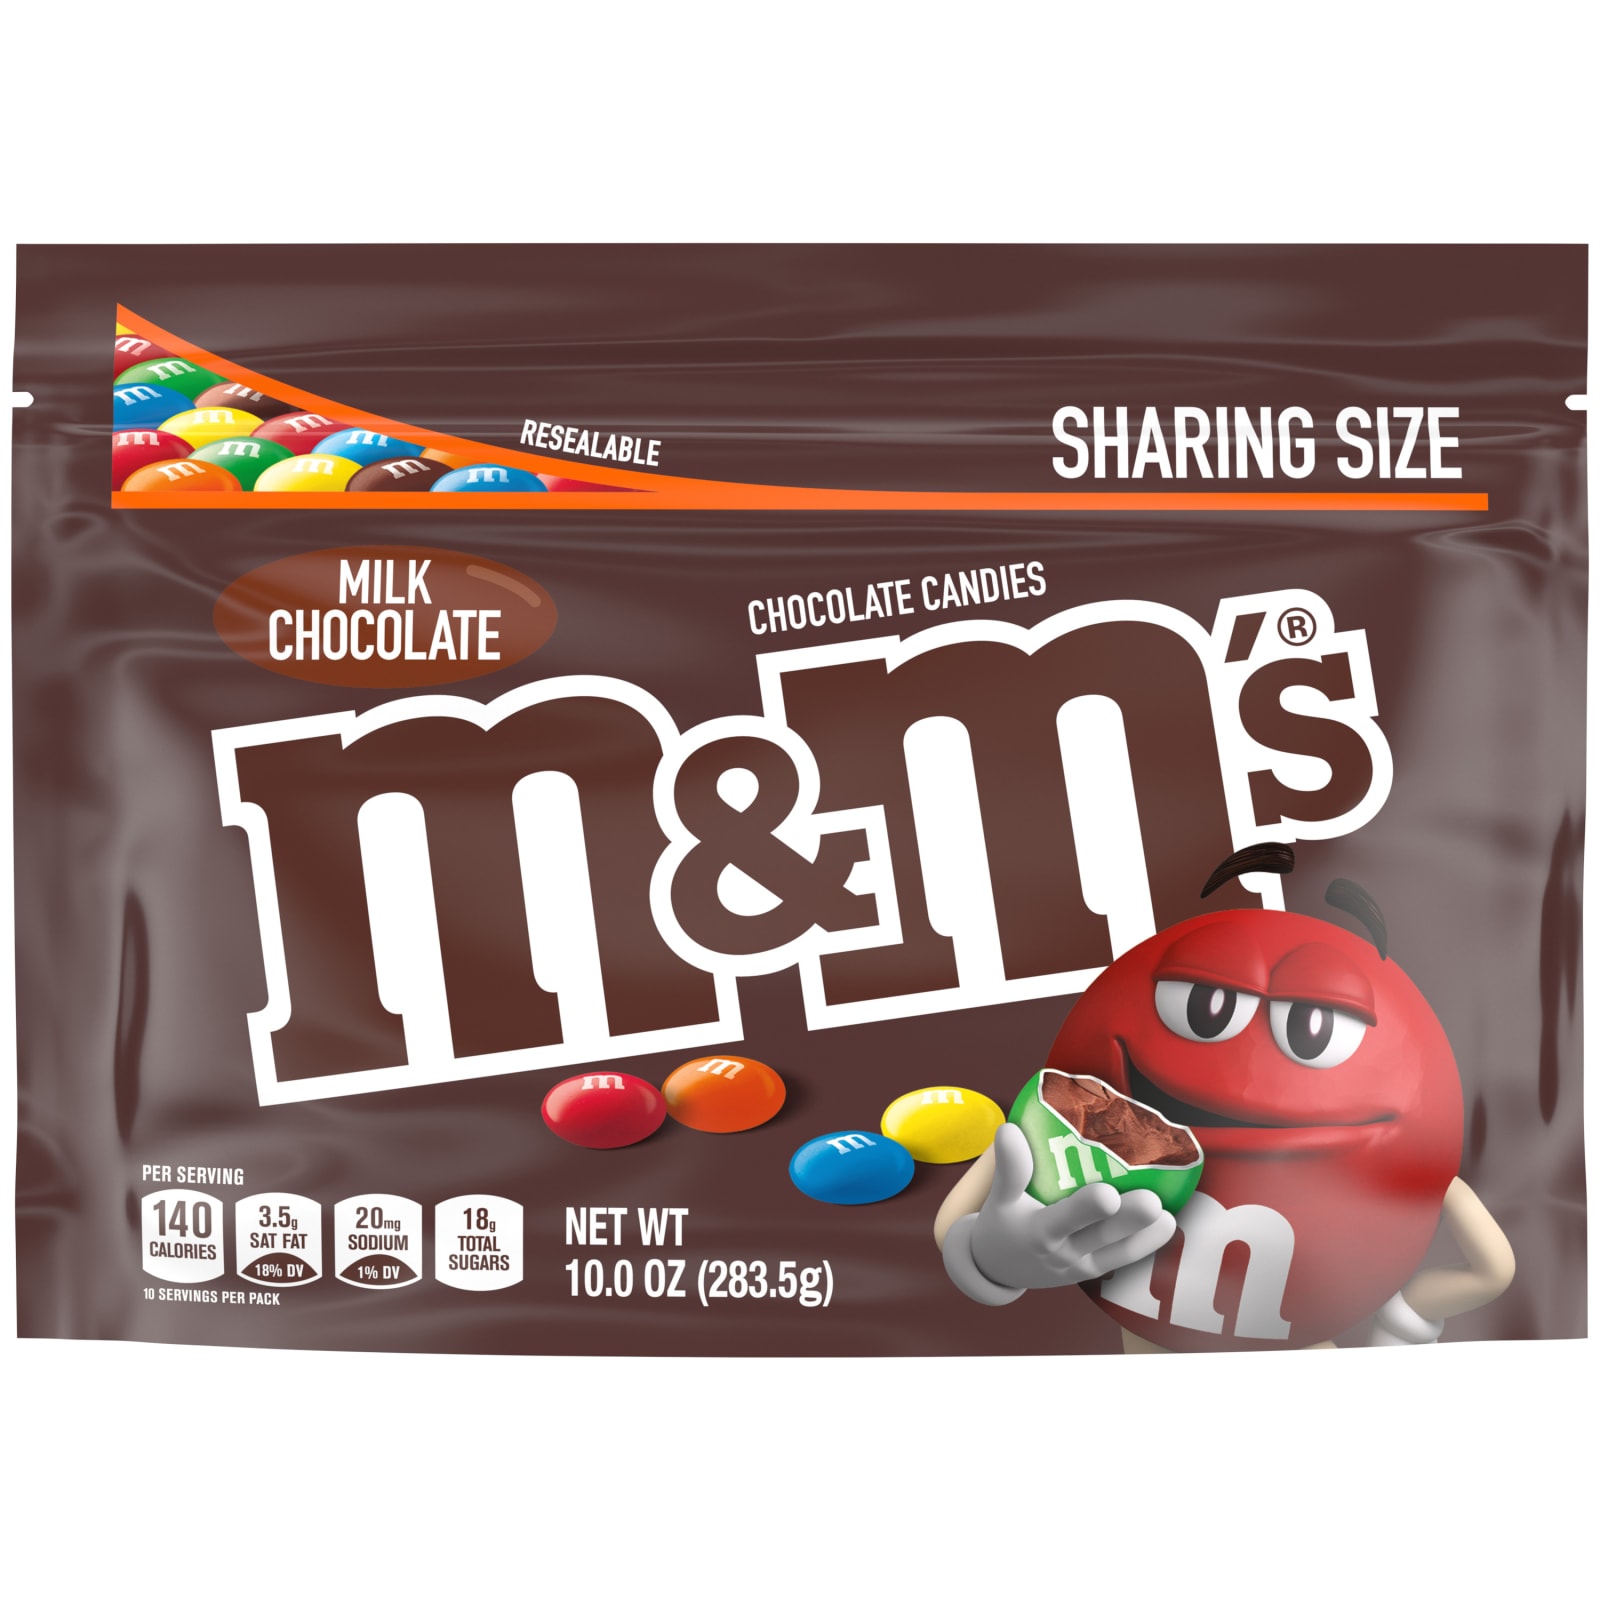 First Came Surge, Now Comes Crispy M&M's